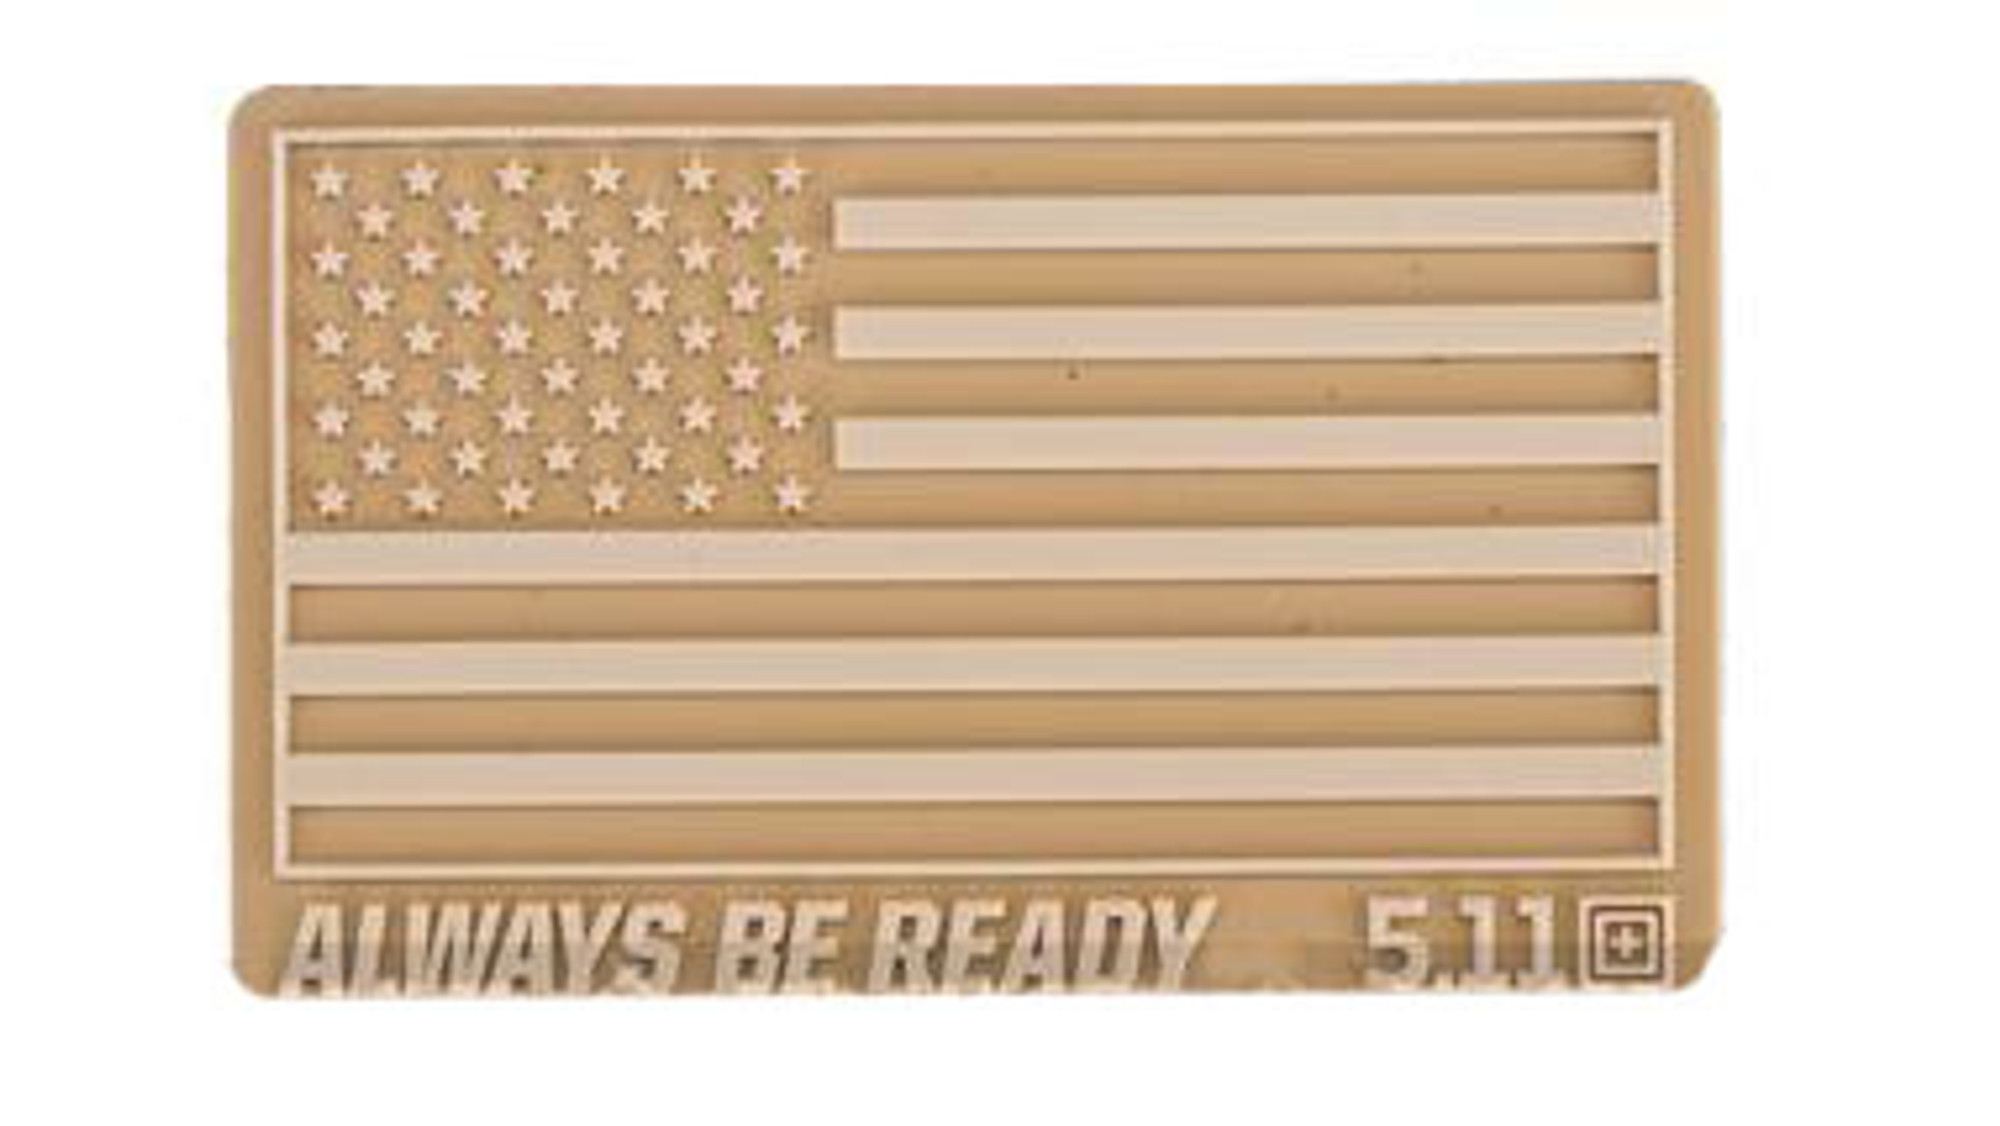 G-Force Lock N Load American Flag and Rifle PVC Morale Patch